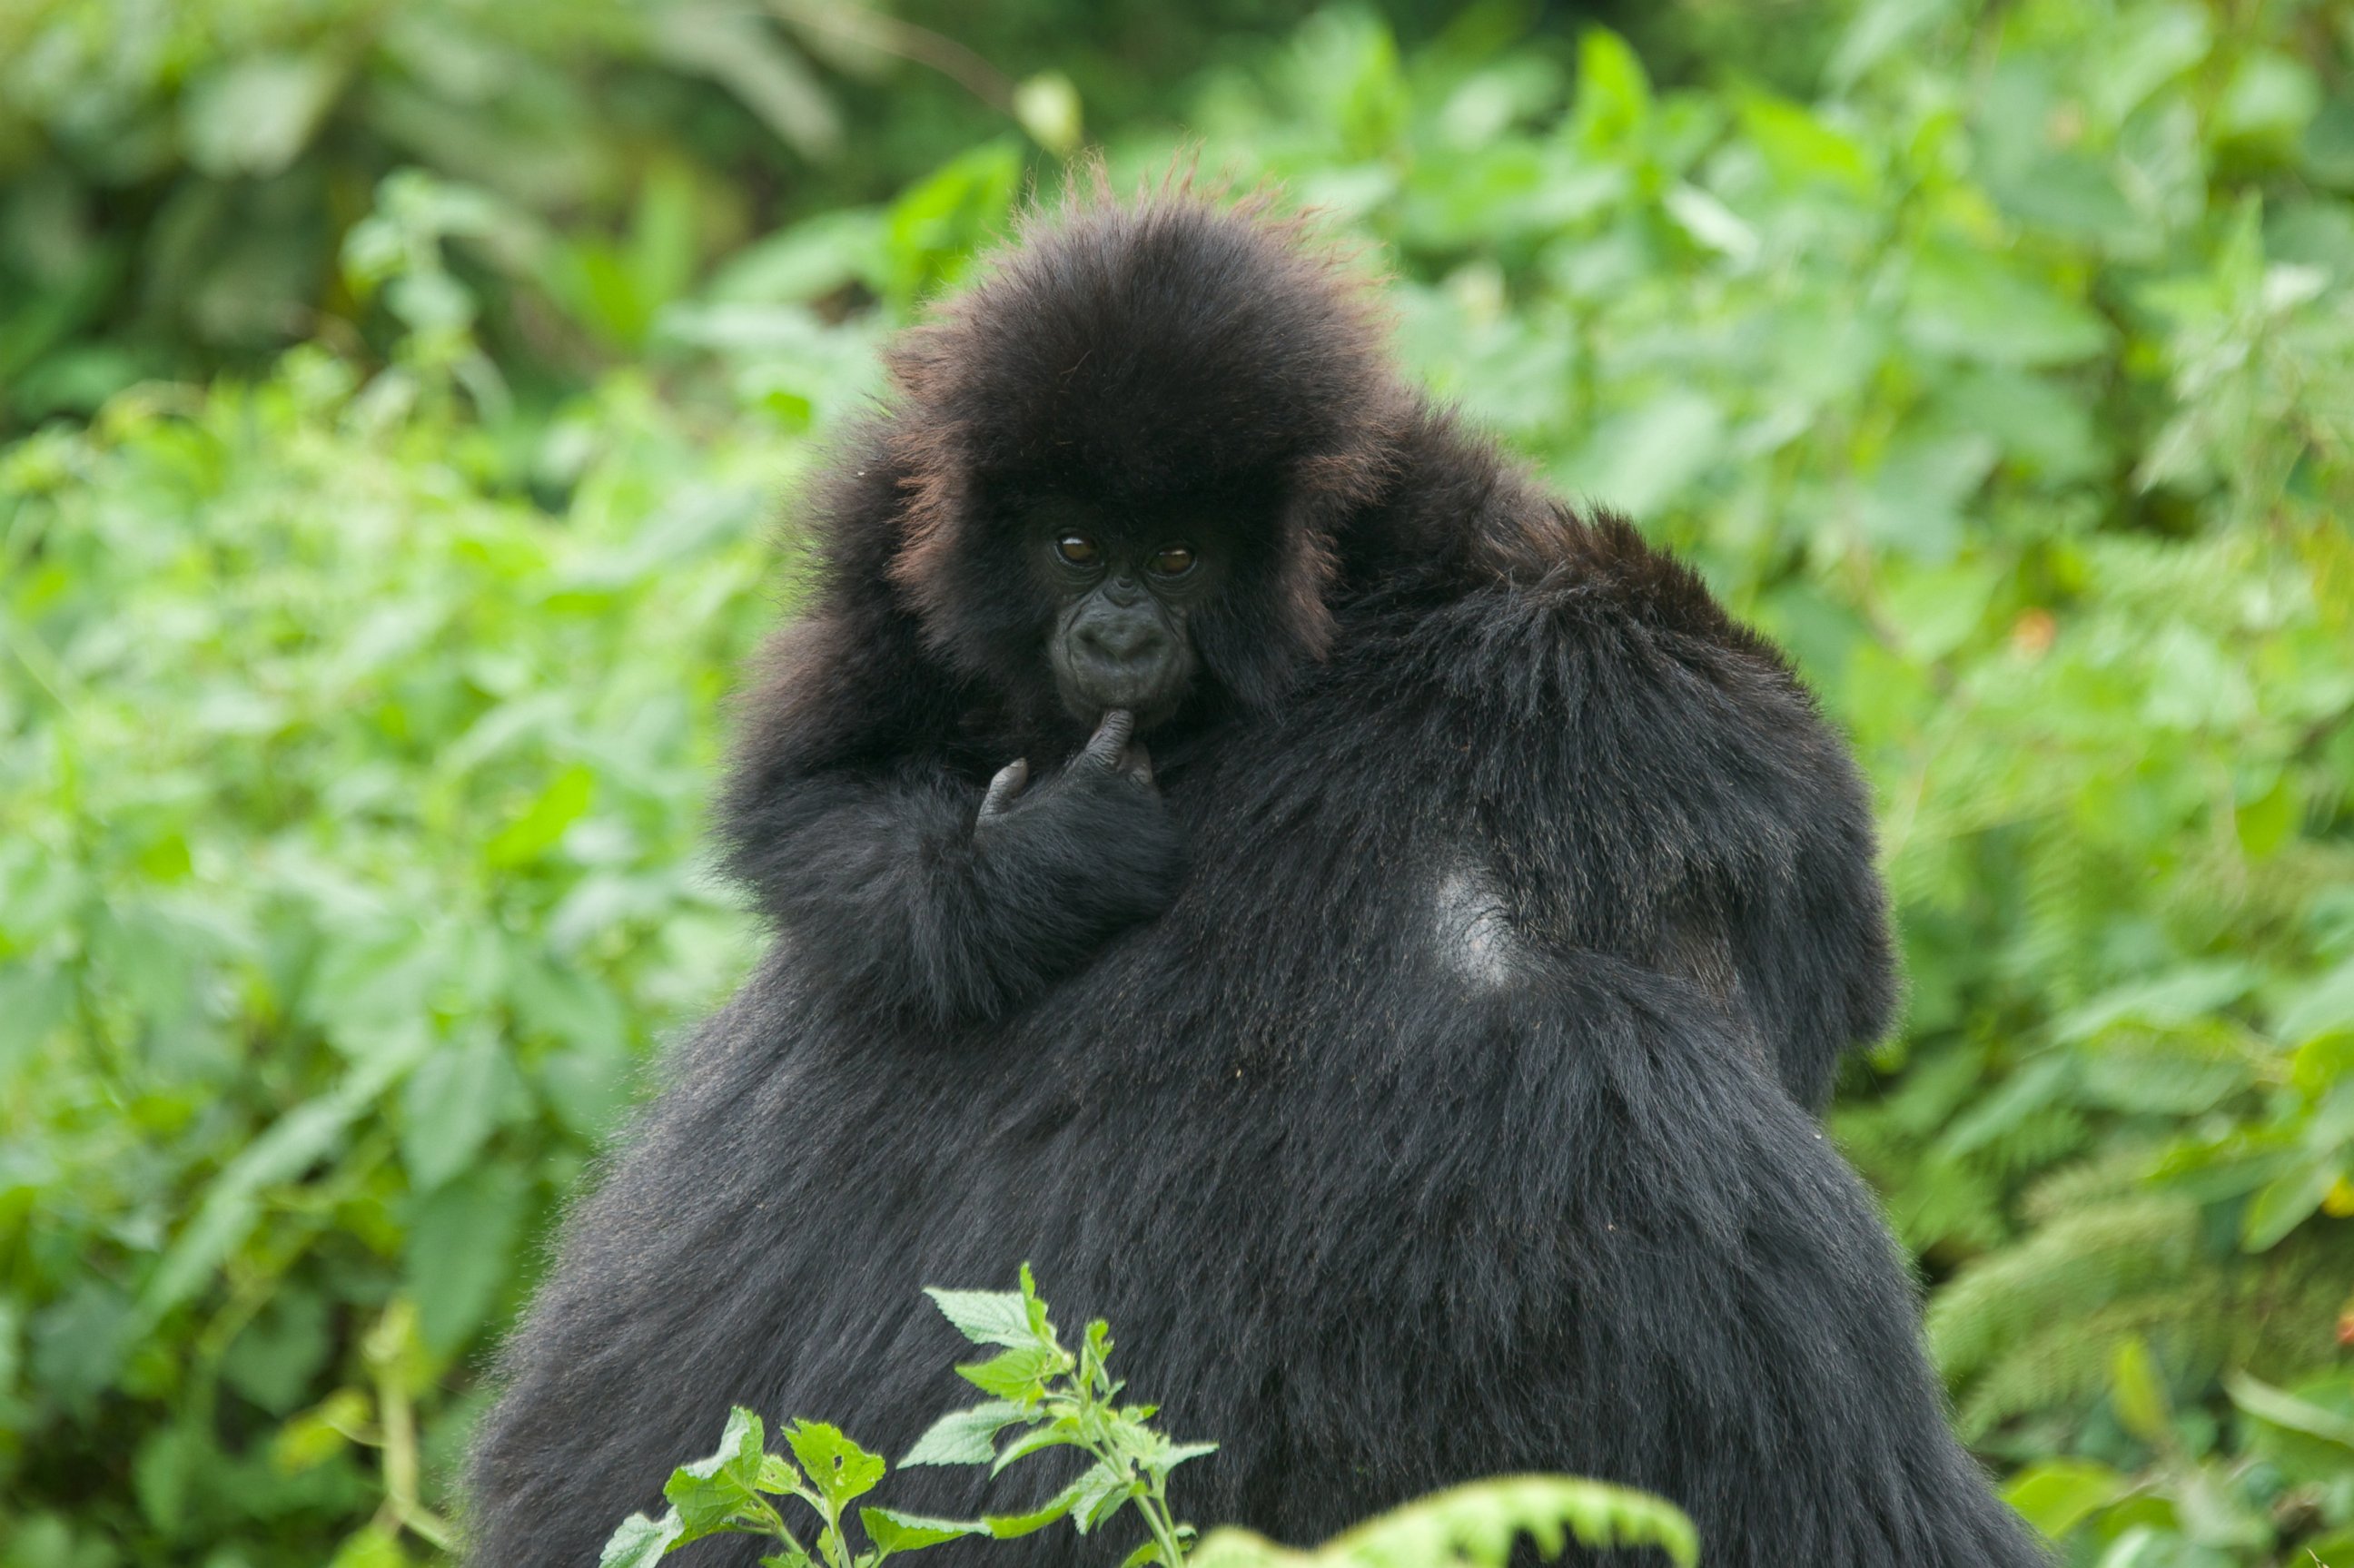 PHOTO: Mbere's baby gorilla is pictured. Rwanda named 24 new baby gorillas during the 11th Annual Gorilla Naming Ceremony, Kwita Izina, at the foothills of the Virunga Mountains.